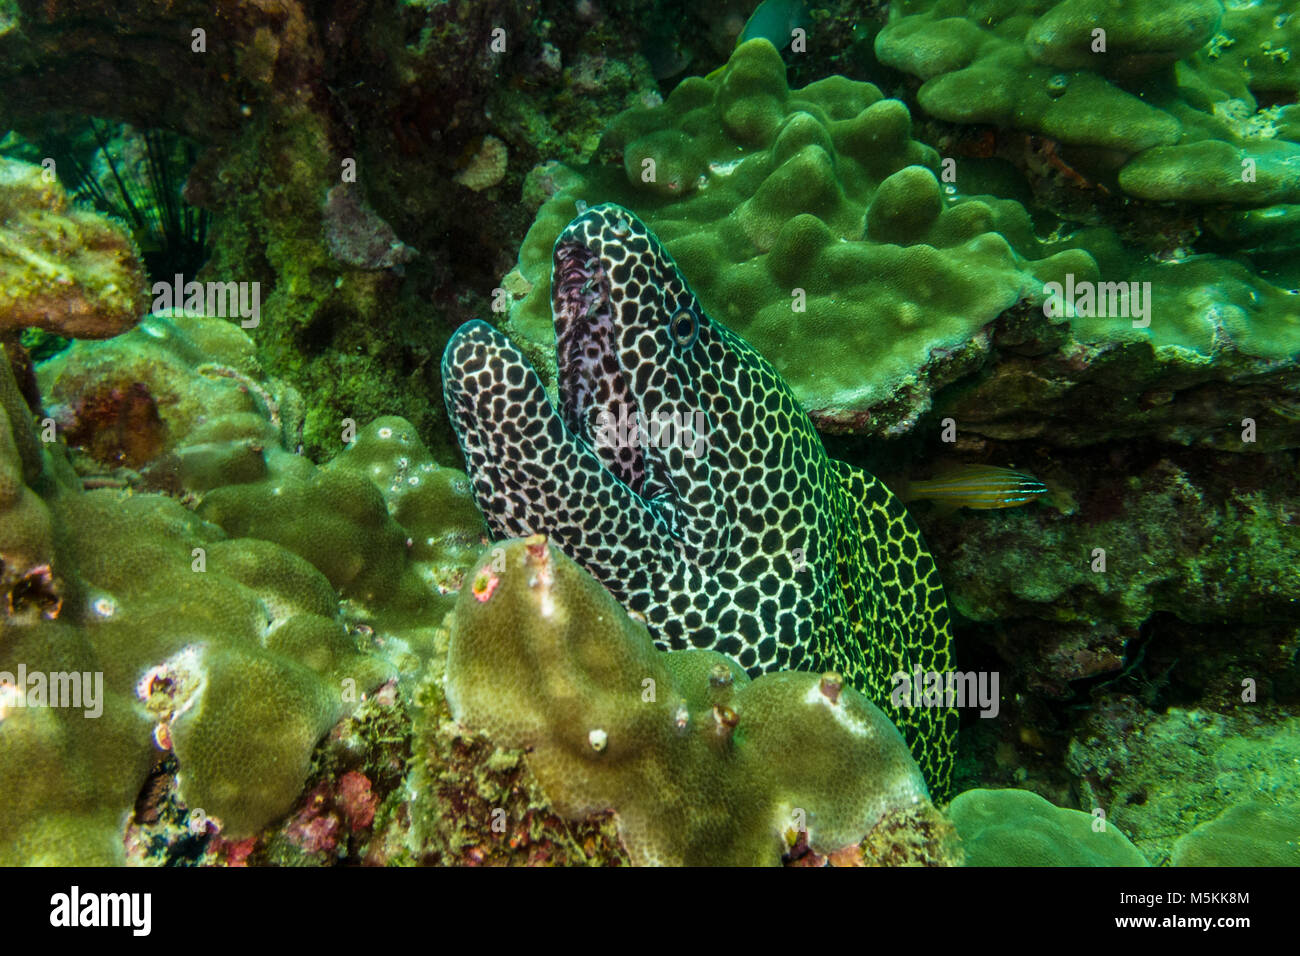 Portrait of a moray eel in the sultanate oman Stock Photo